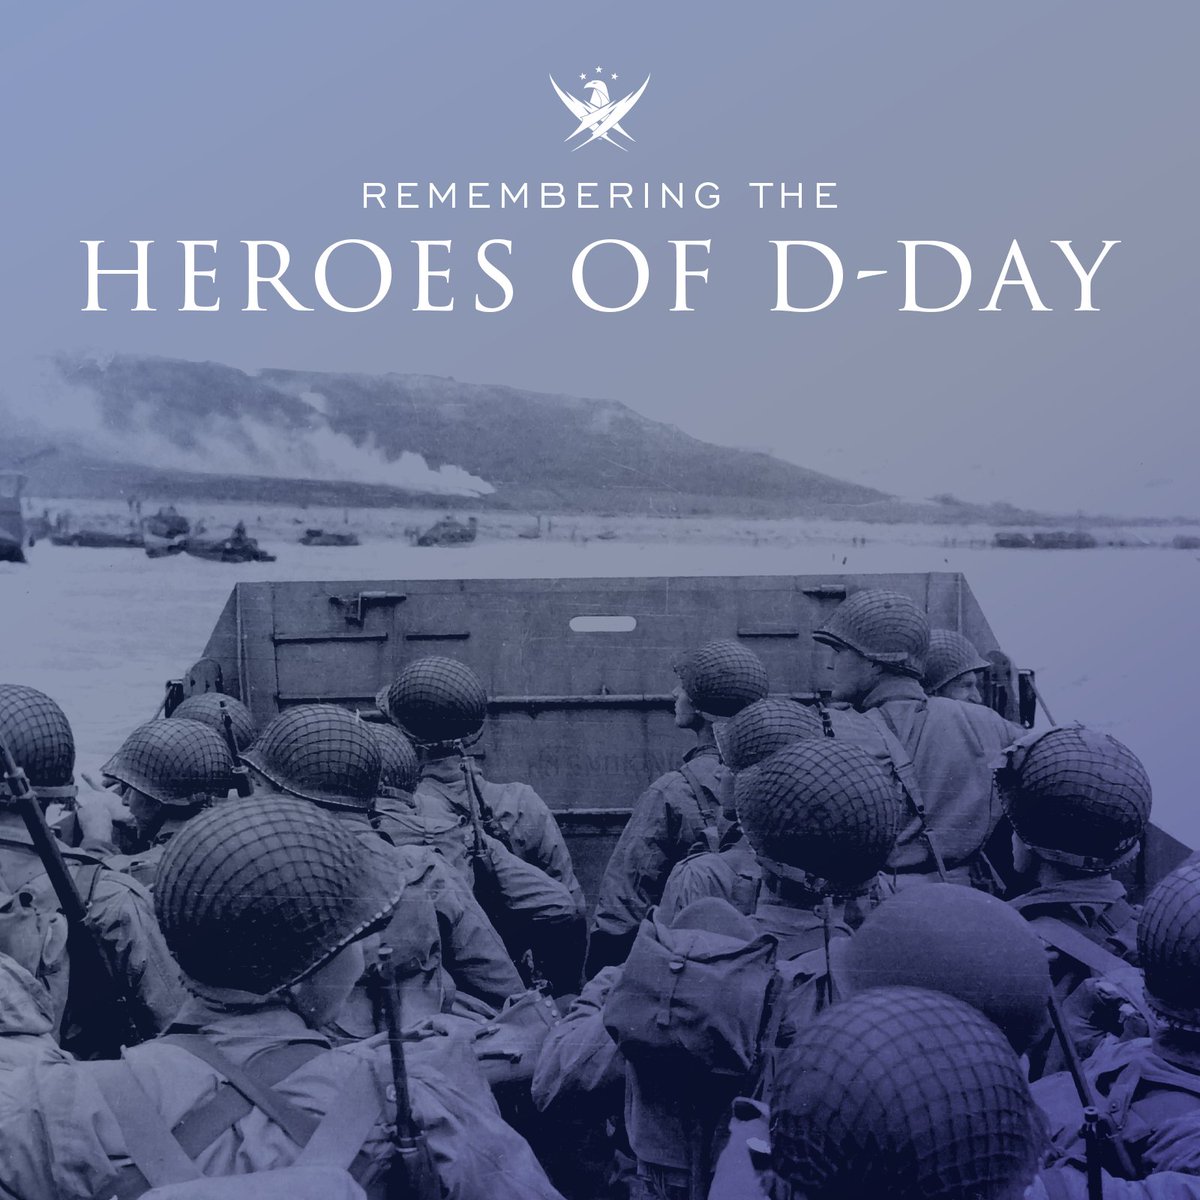 79 years ago today, the U.S. Military, in conjunction with Allied forces from both Canada & England, stormed the beaches of Normandy. June 6, 1944, is a date forever known as D-Day. To the Greatest Generation, we thank you. bit.ly/2UGwd0E